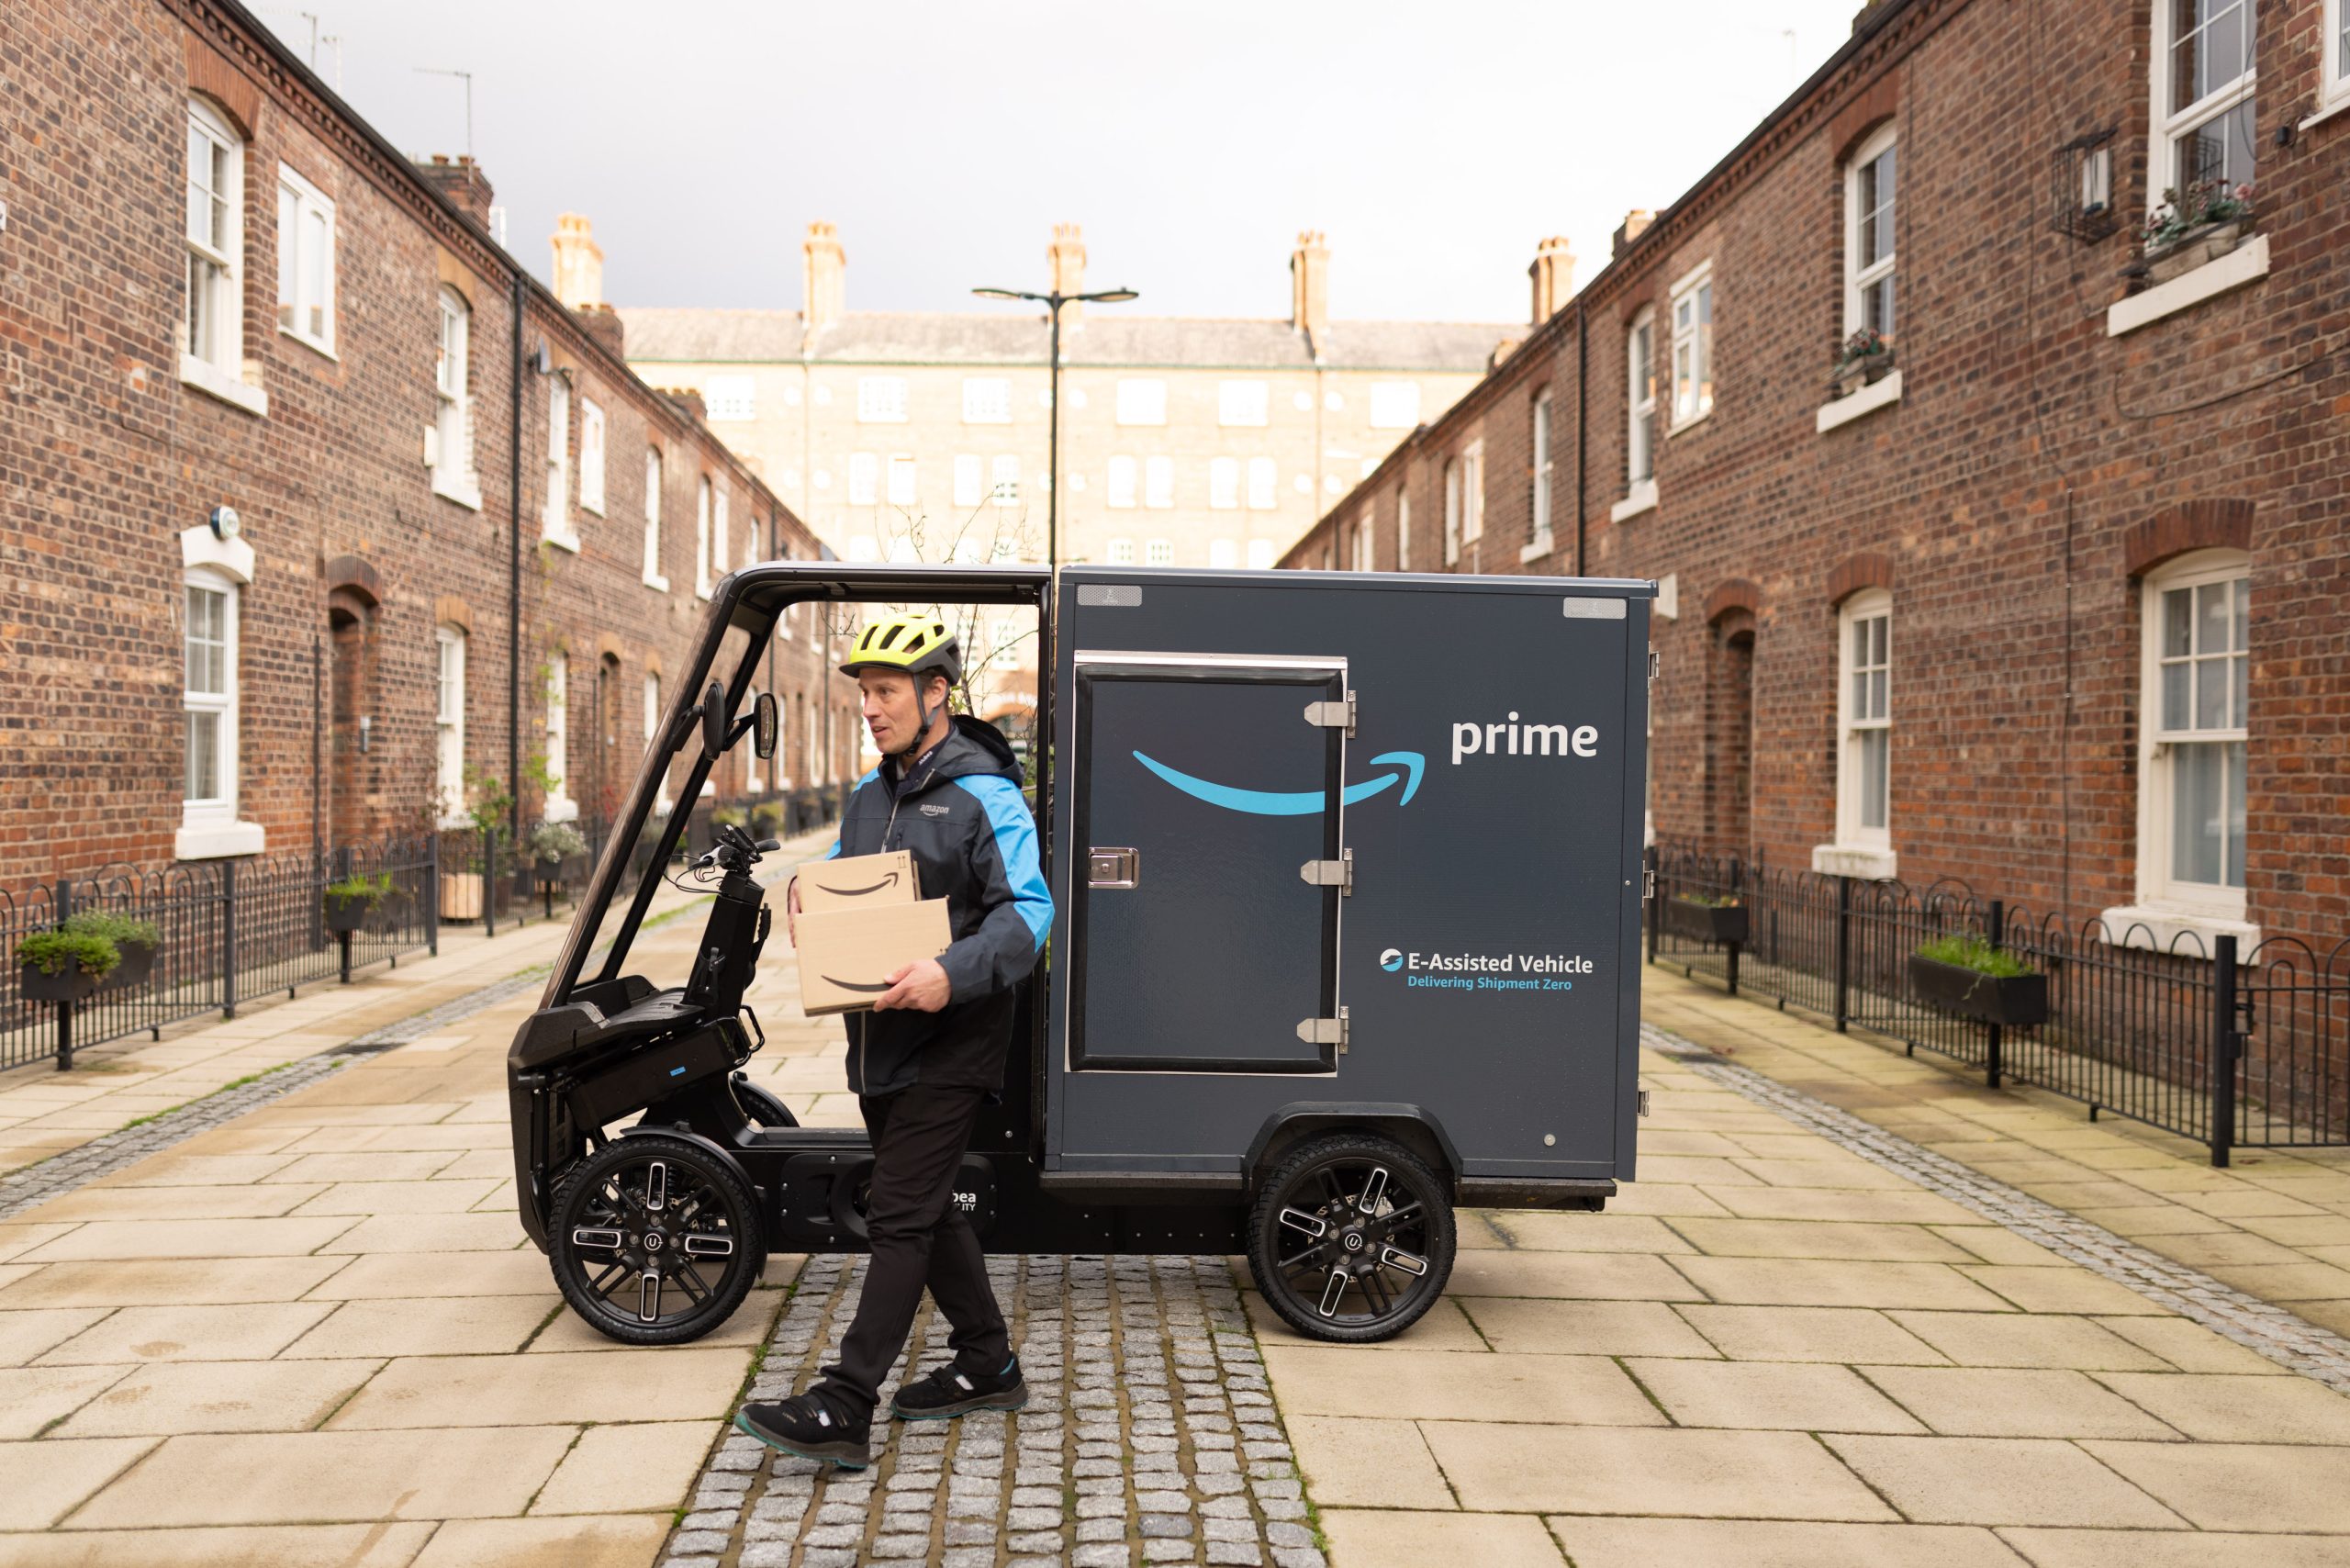 Amazon opens three new micromobility hubs in the UK